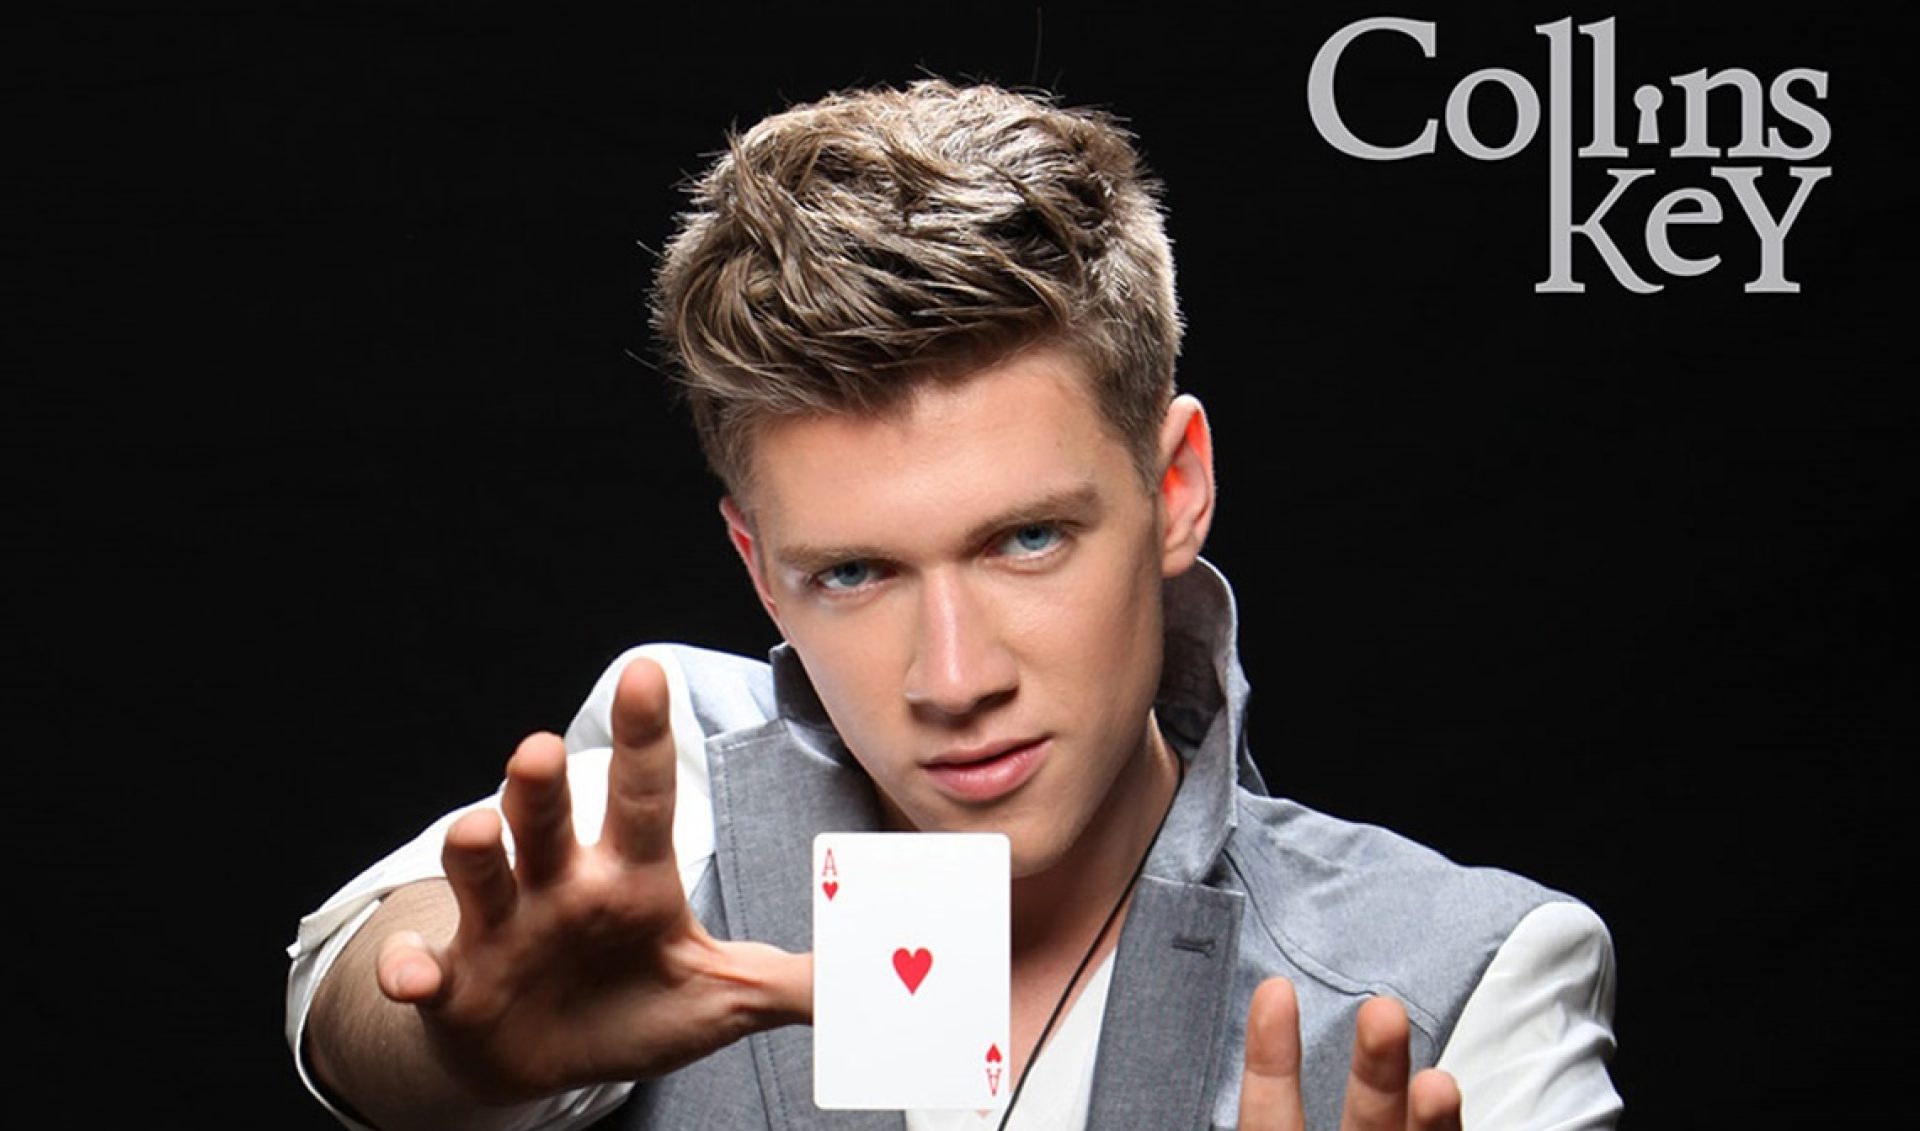 YouTube Millionaires: Collins Key Shows Magic Doesn’t Need To Be "Dark...